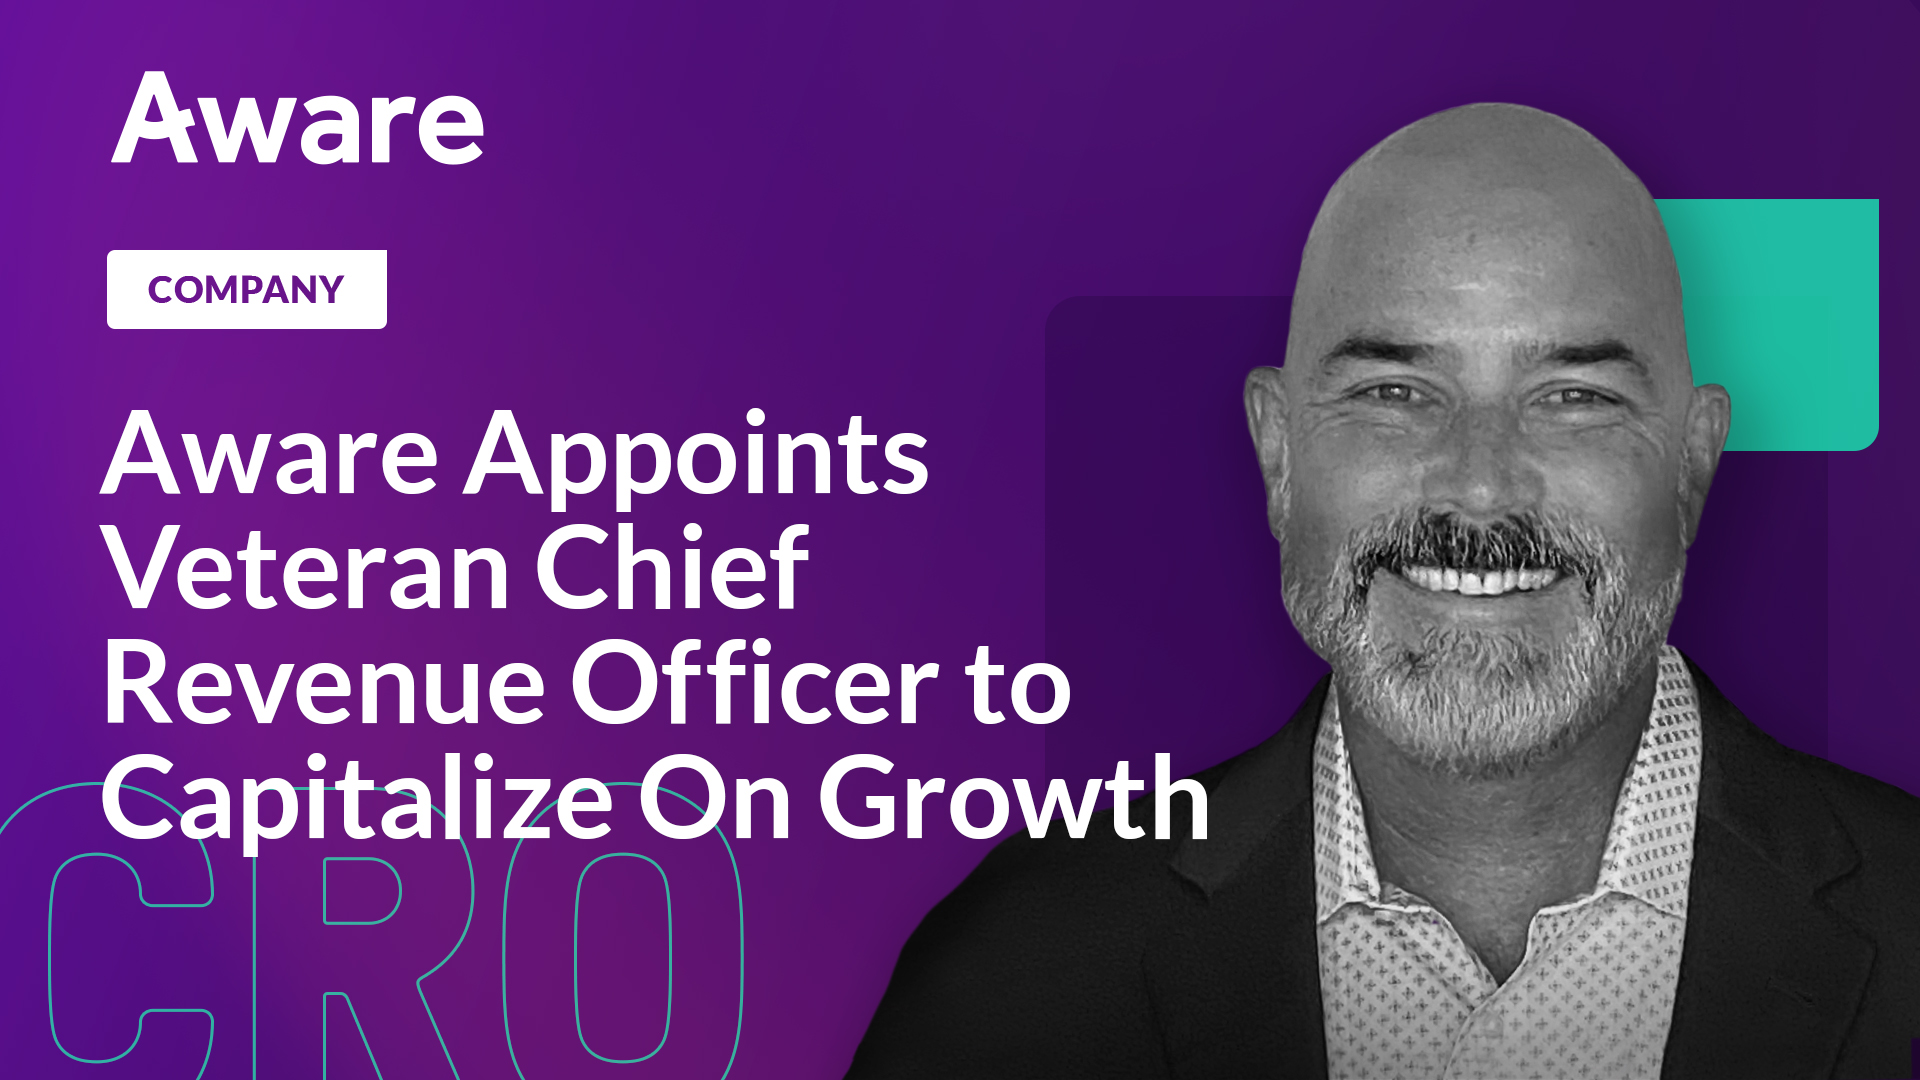 Aware Appoints Veteran Chief Revenue Officer to Capitalize on Growth